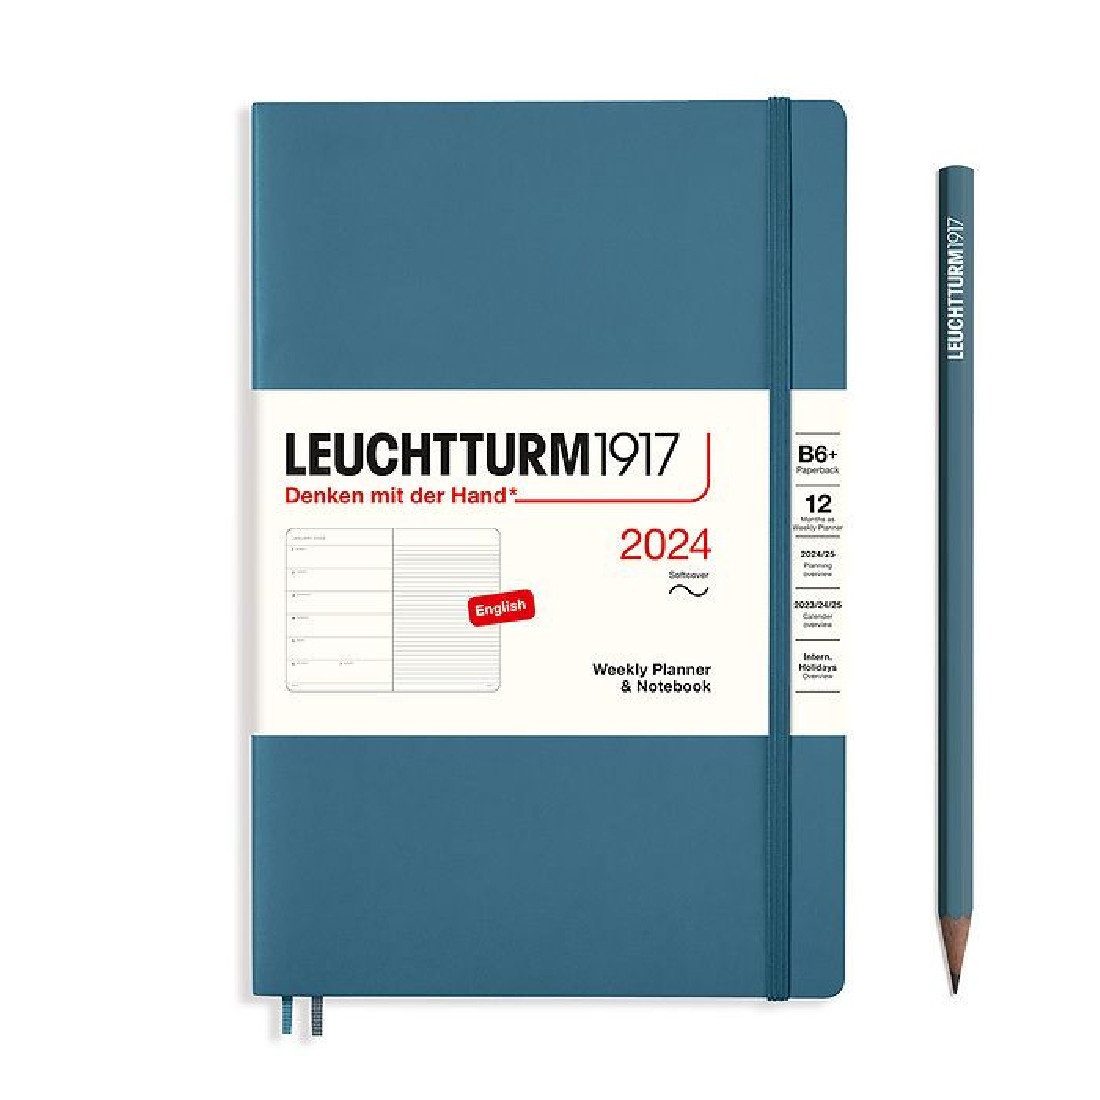 Leuchtturm 1917 Weekly Planner and Notebook 2024 Stone Blue Paperback B6 Plus Soft Cover